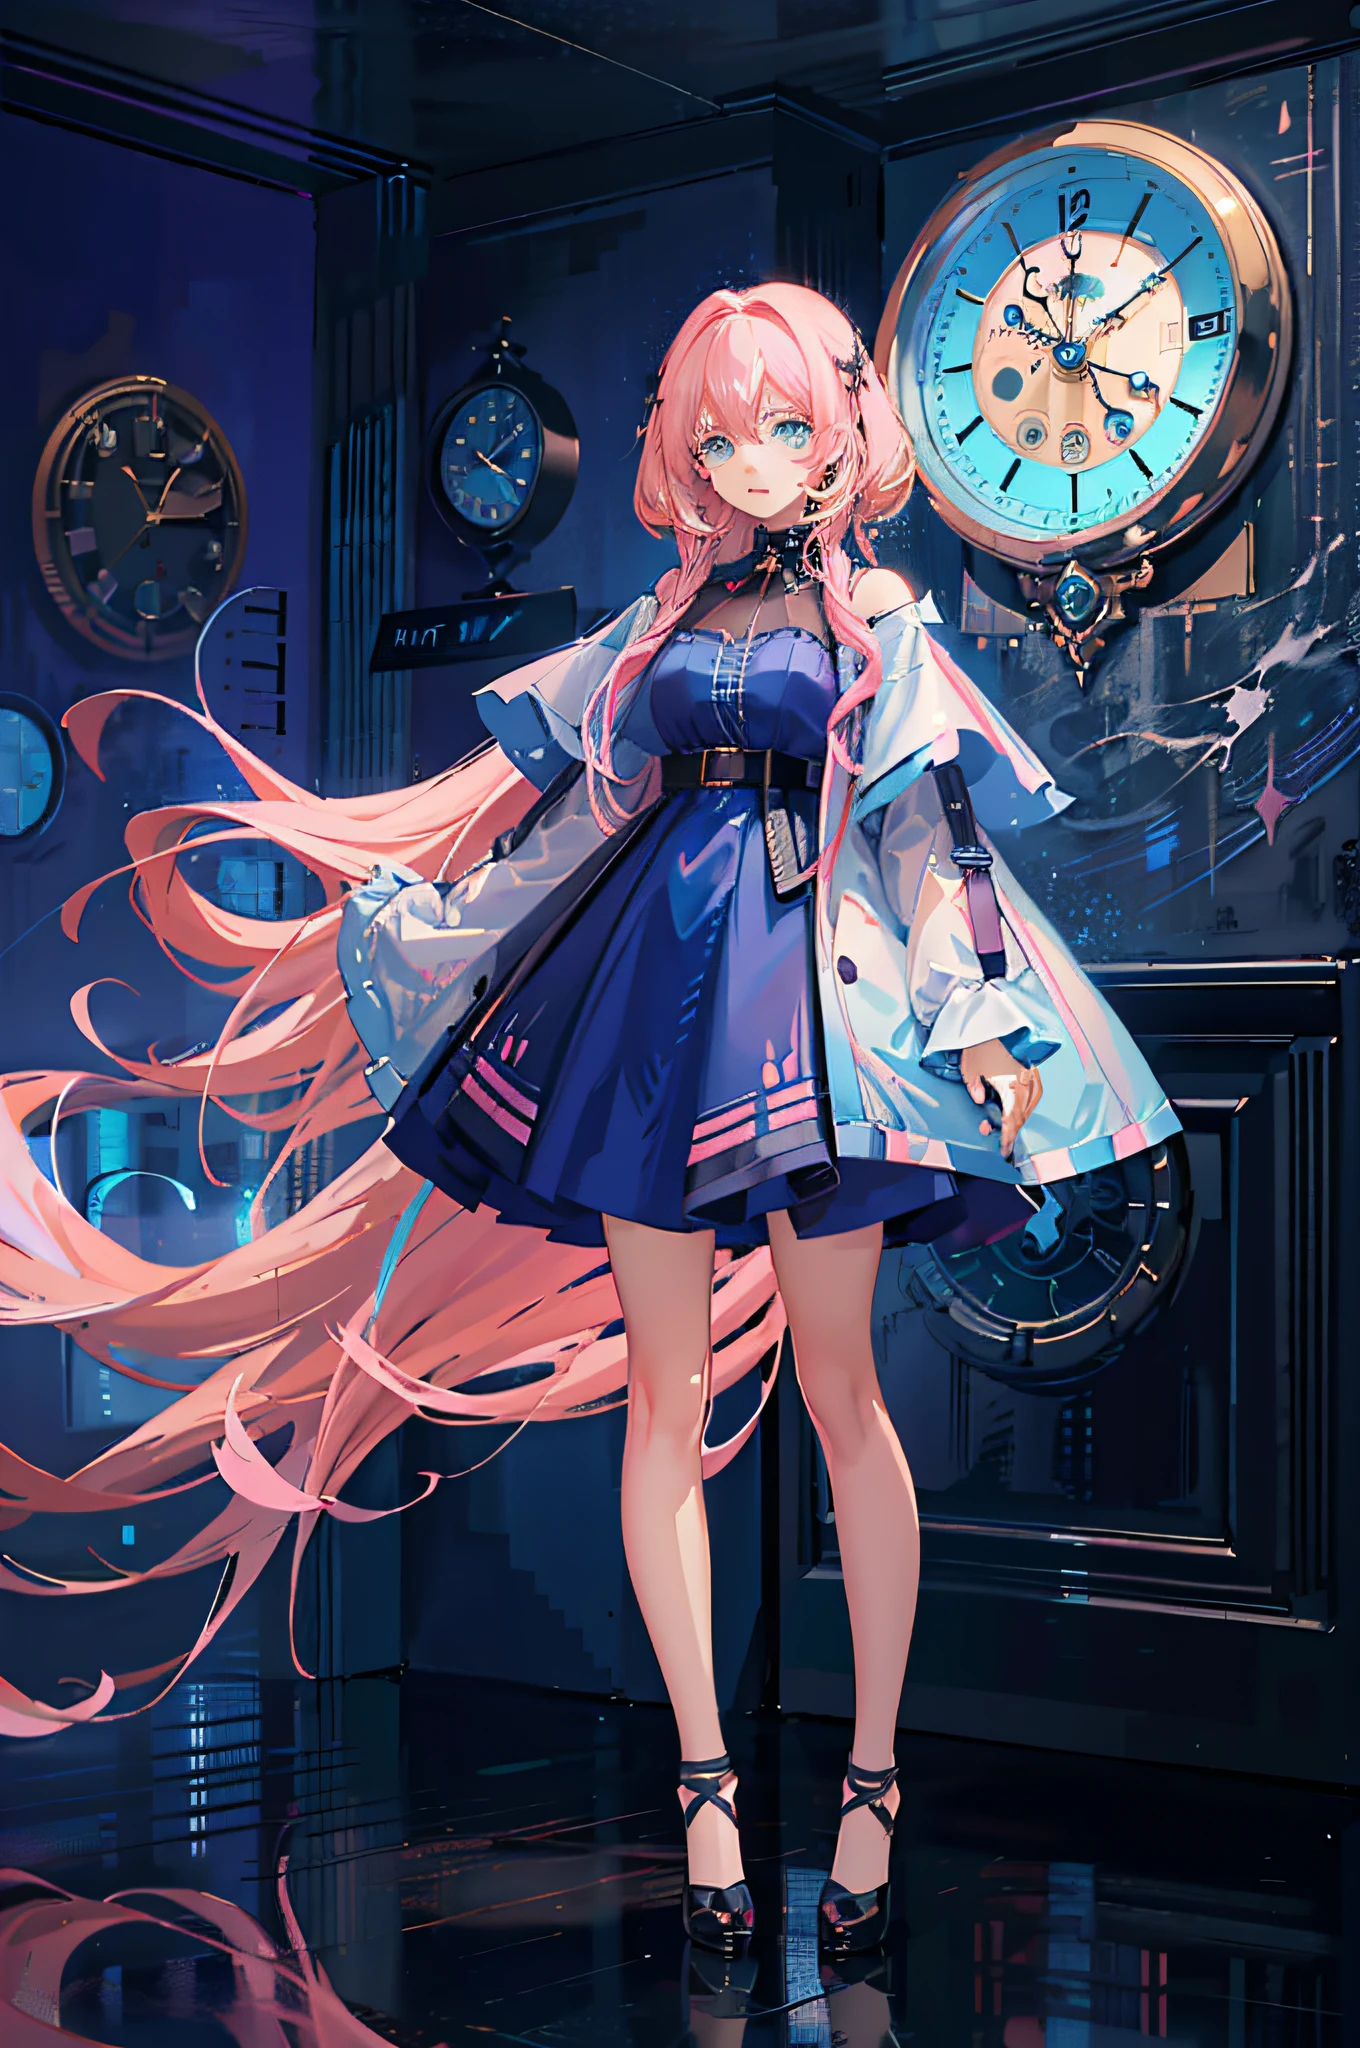 (Ultra-detailed CG anime masterpiece, 4K anime style) Anime girl with (long pink hair+cyan eyes) standing in front of a (elegant wall clock)+(blurred background), wearing one (stunning blue dress) and emanating an irresistible magical aura.